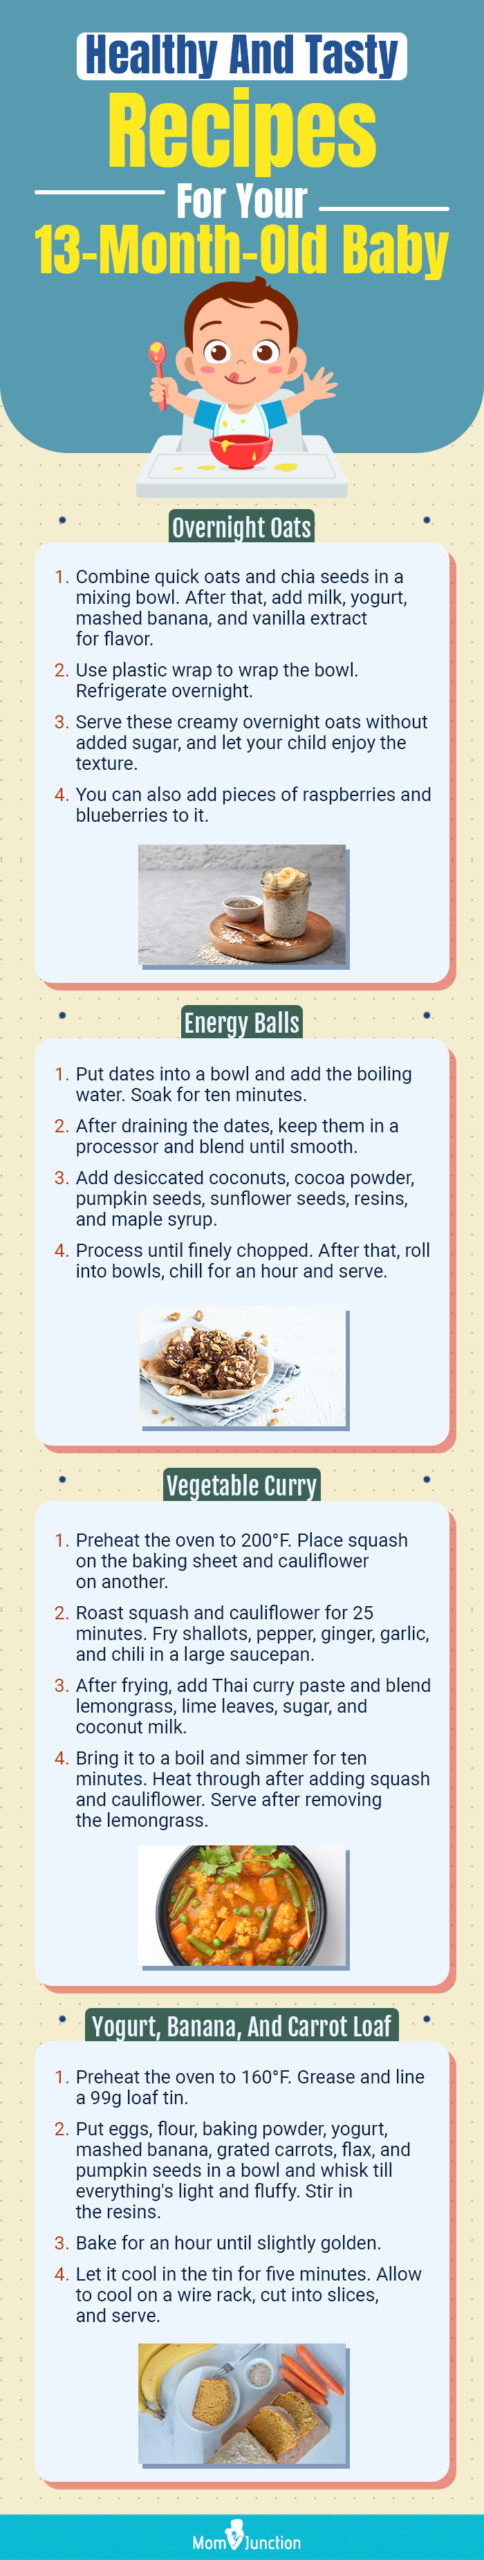 healthy and tasty recipes for your 13 month old baby (infographic)